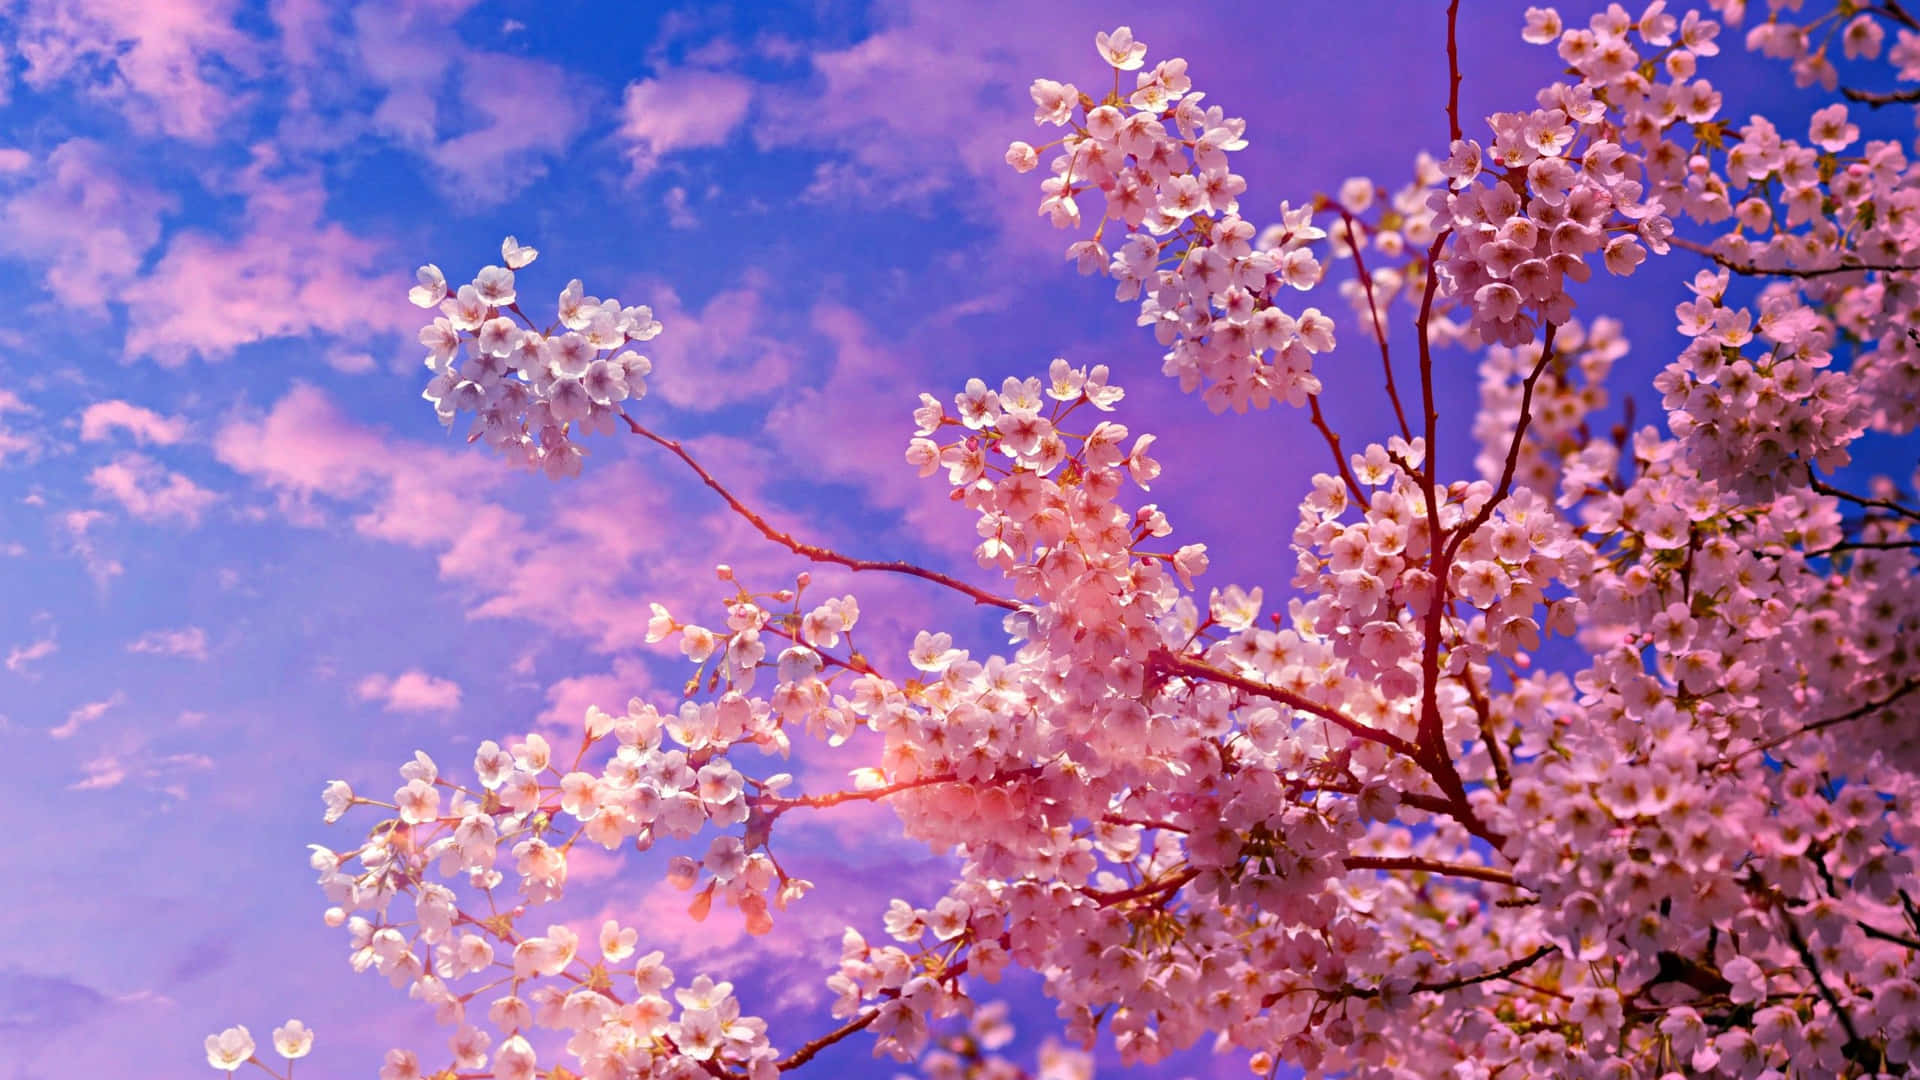 A picturesque view of a Sakura Blossom tree in full bloom Wallpaper